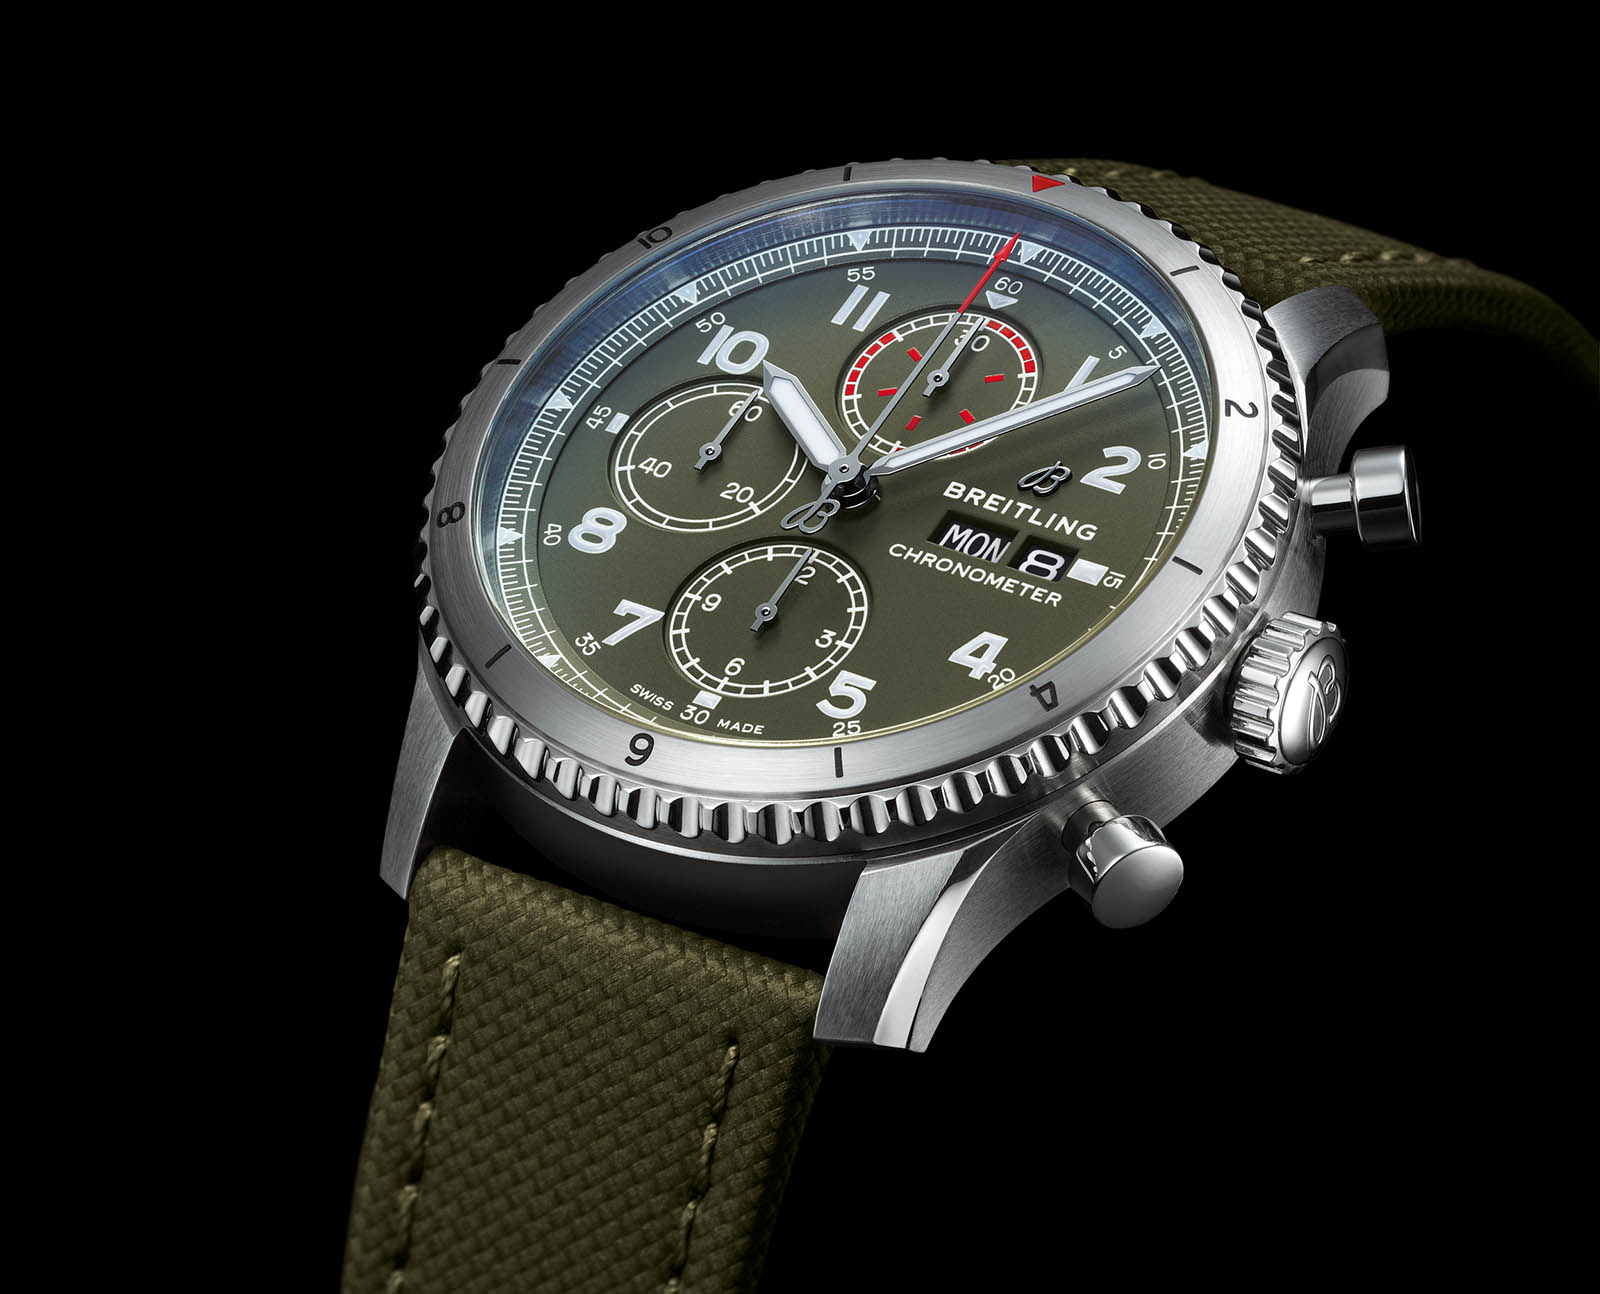 Aviator 8 Chronograph 43 Curtiss Warhawk with military green dial and strap